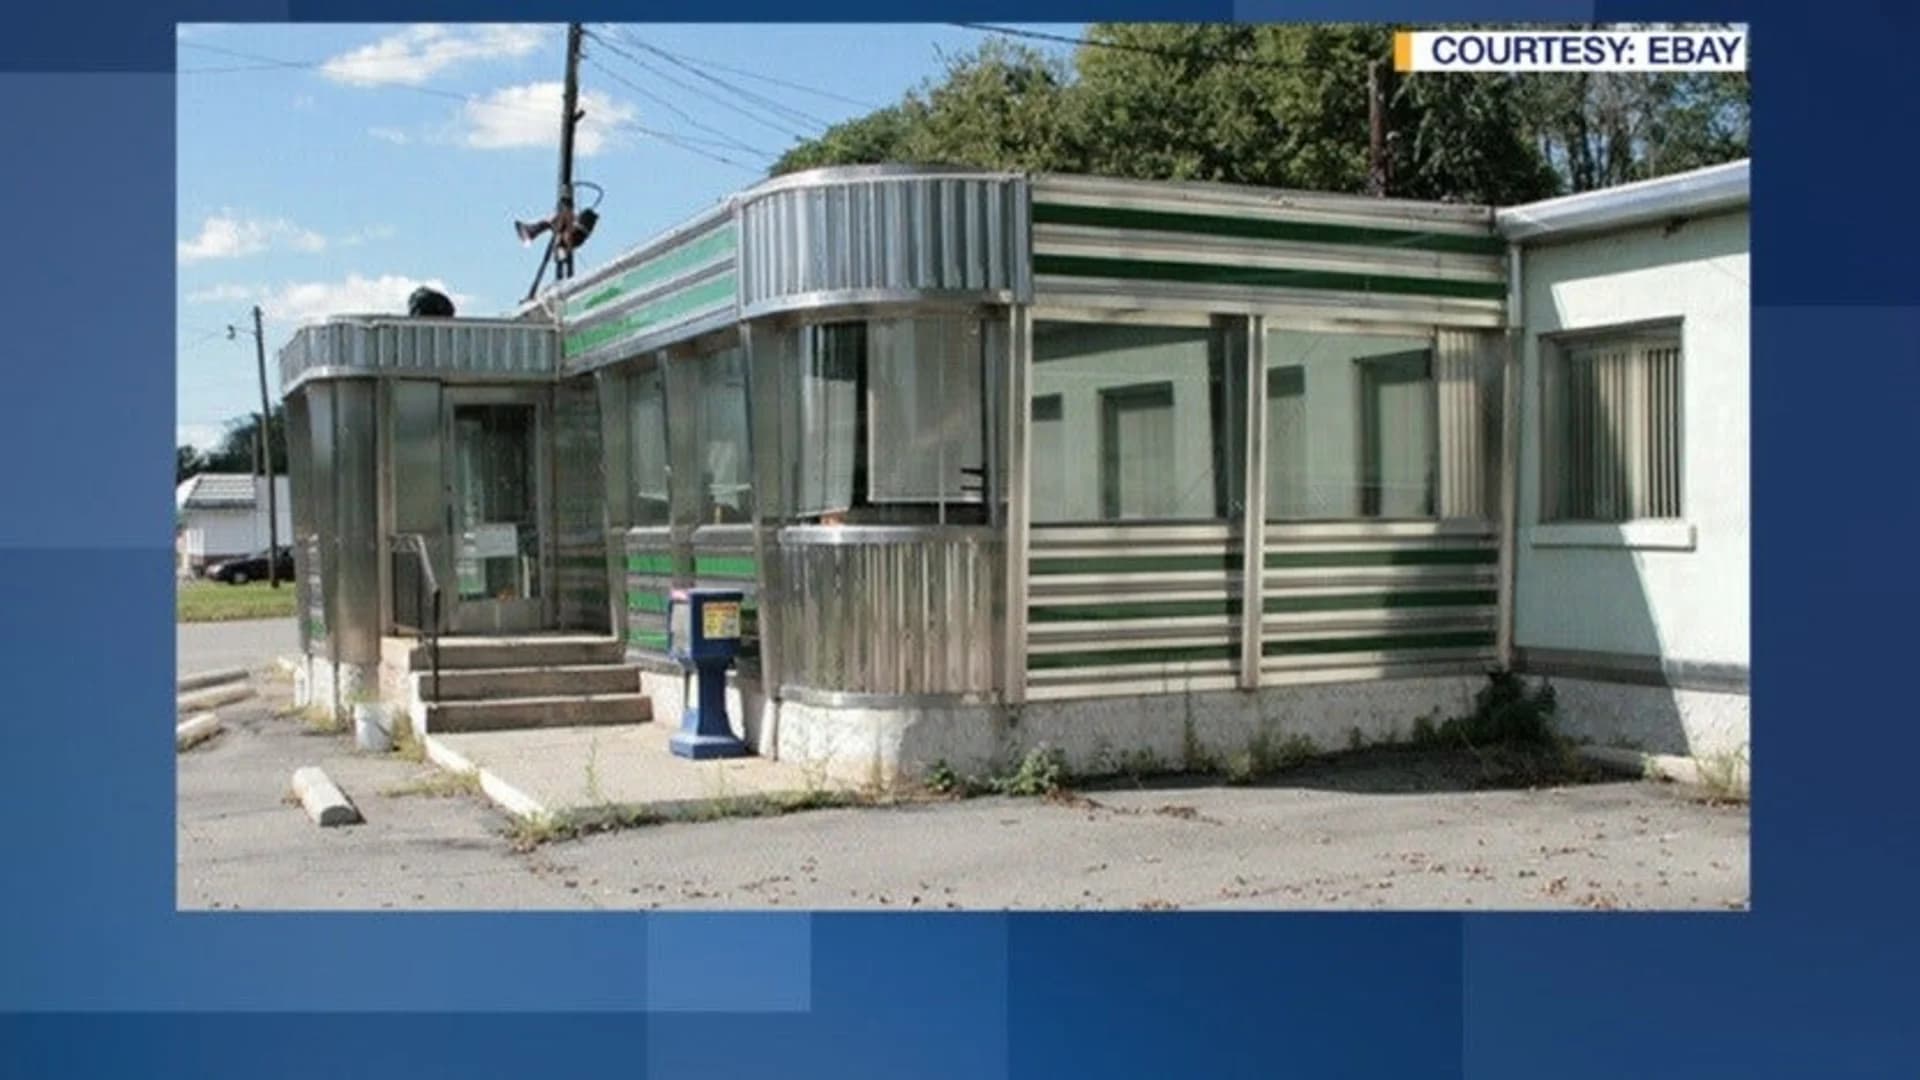 Looking to buy an antique New Jersey diner? Well, now you can